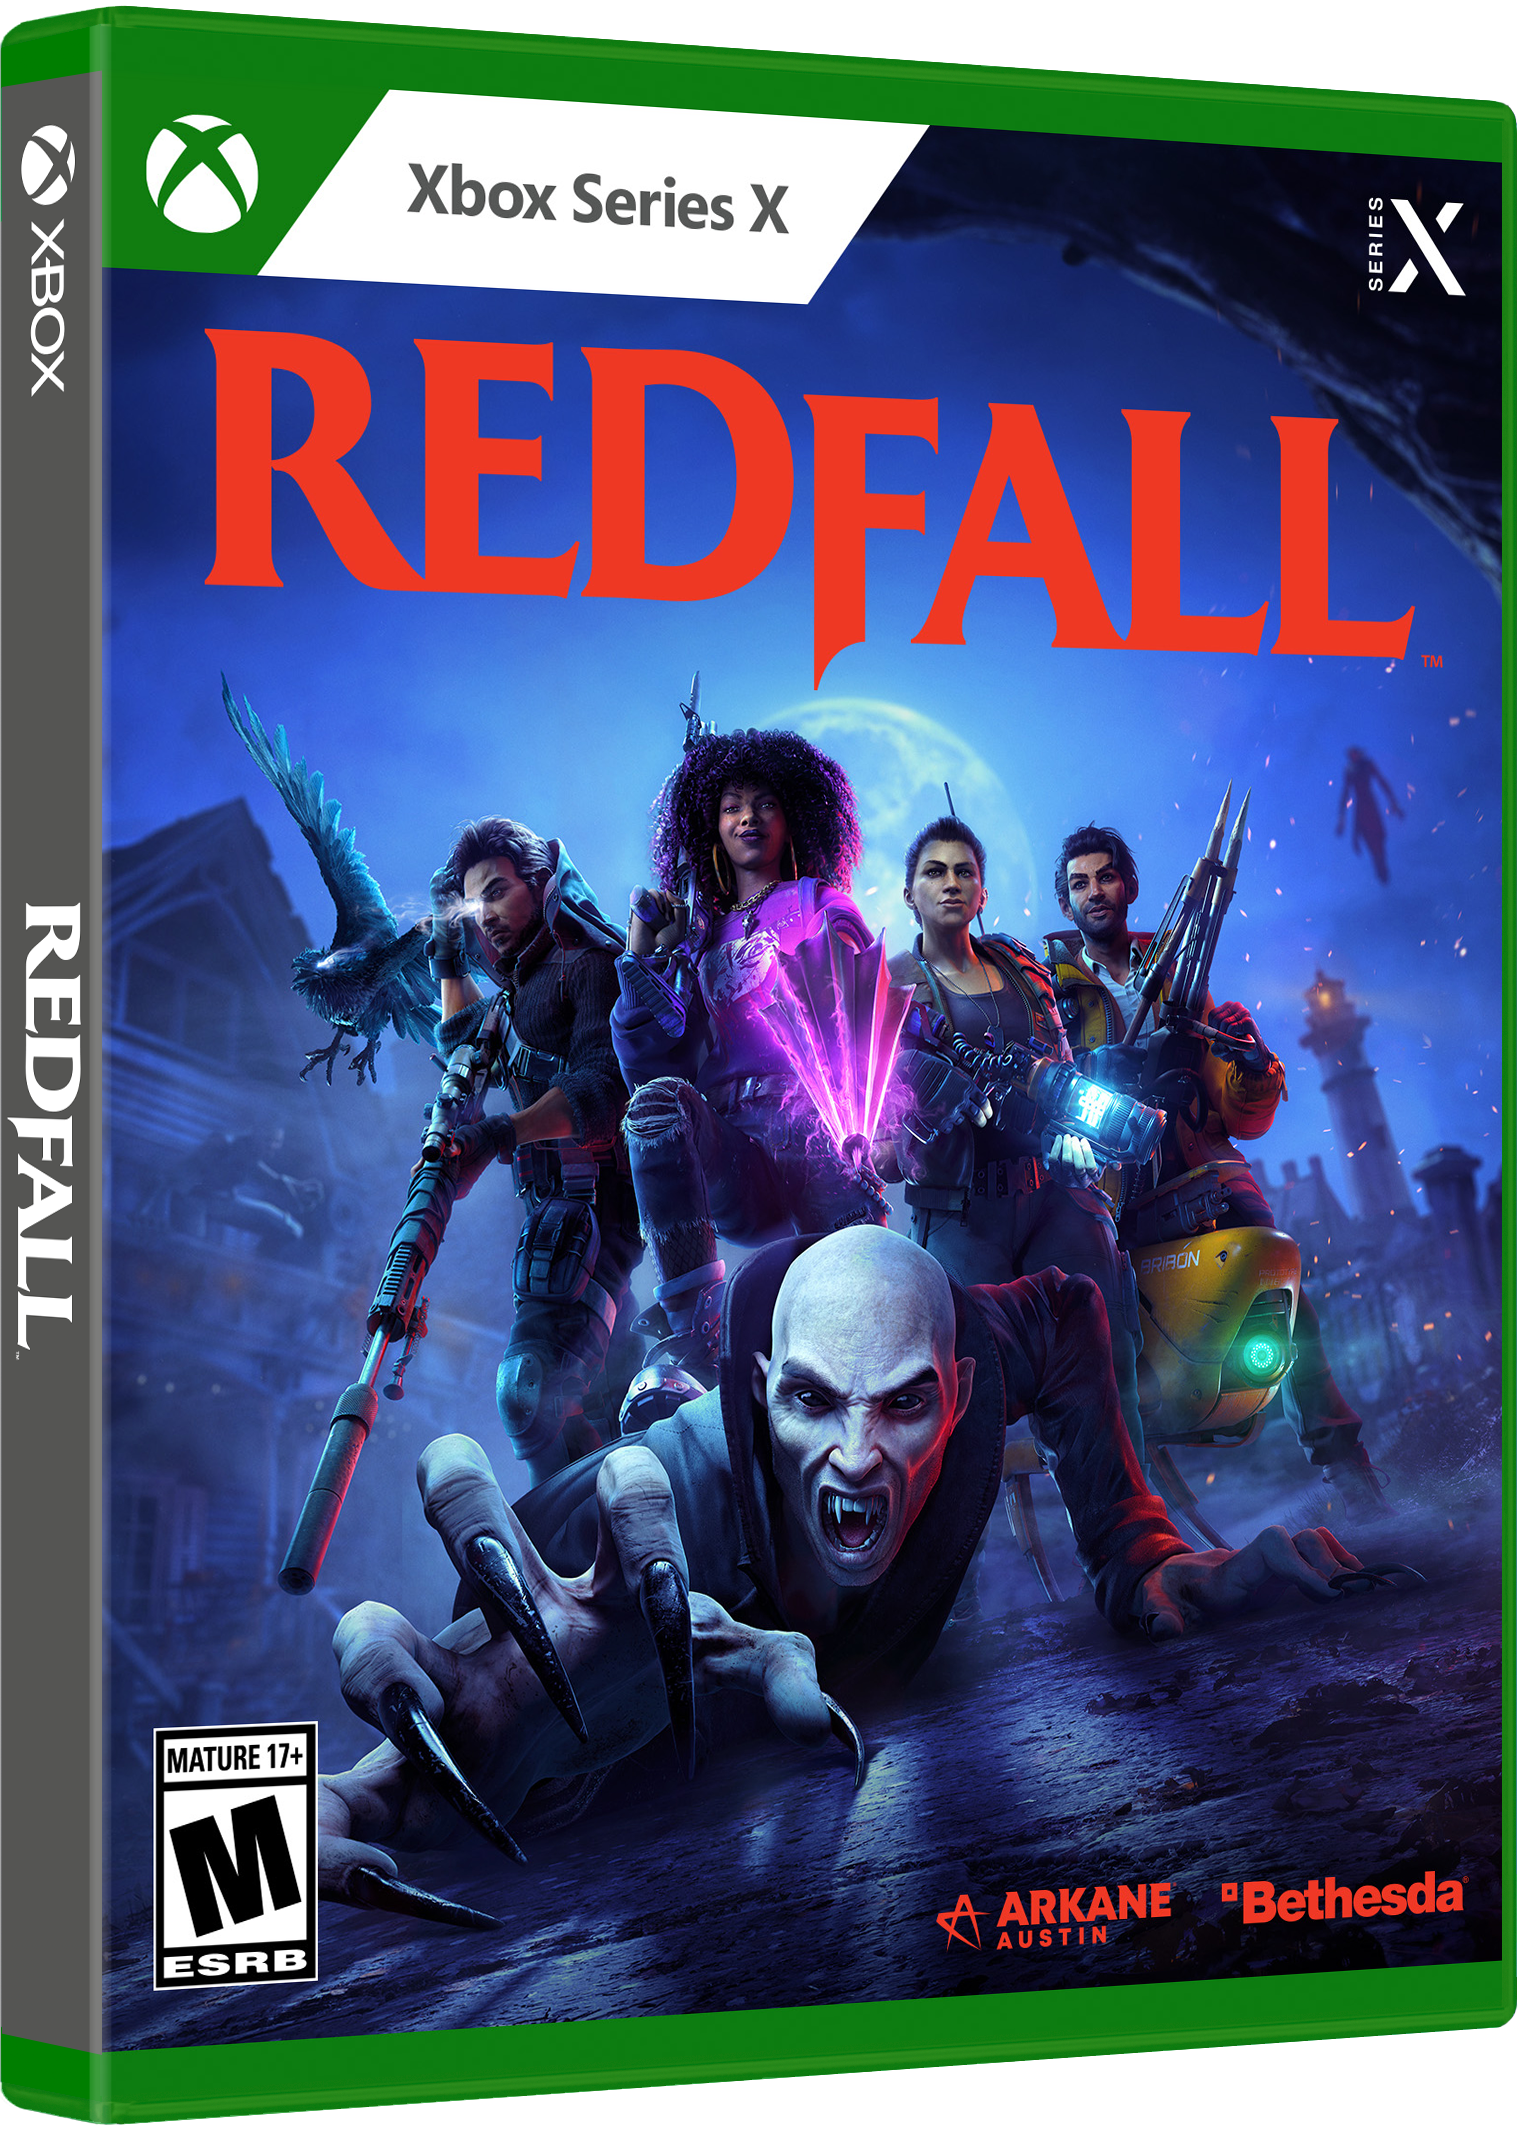 Is Redfall on Xbox One?